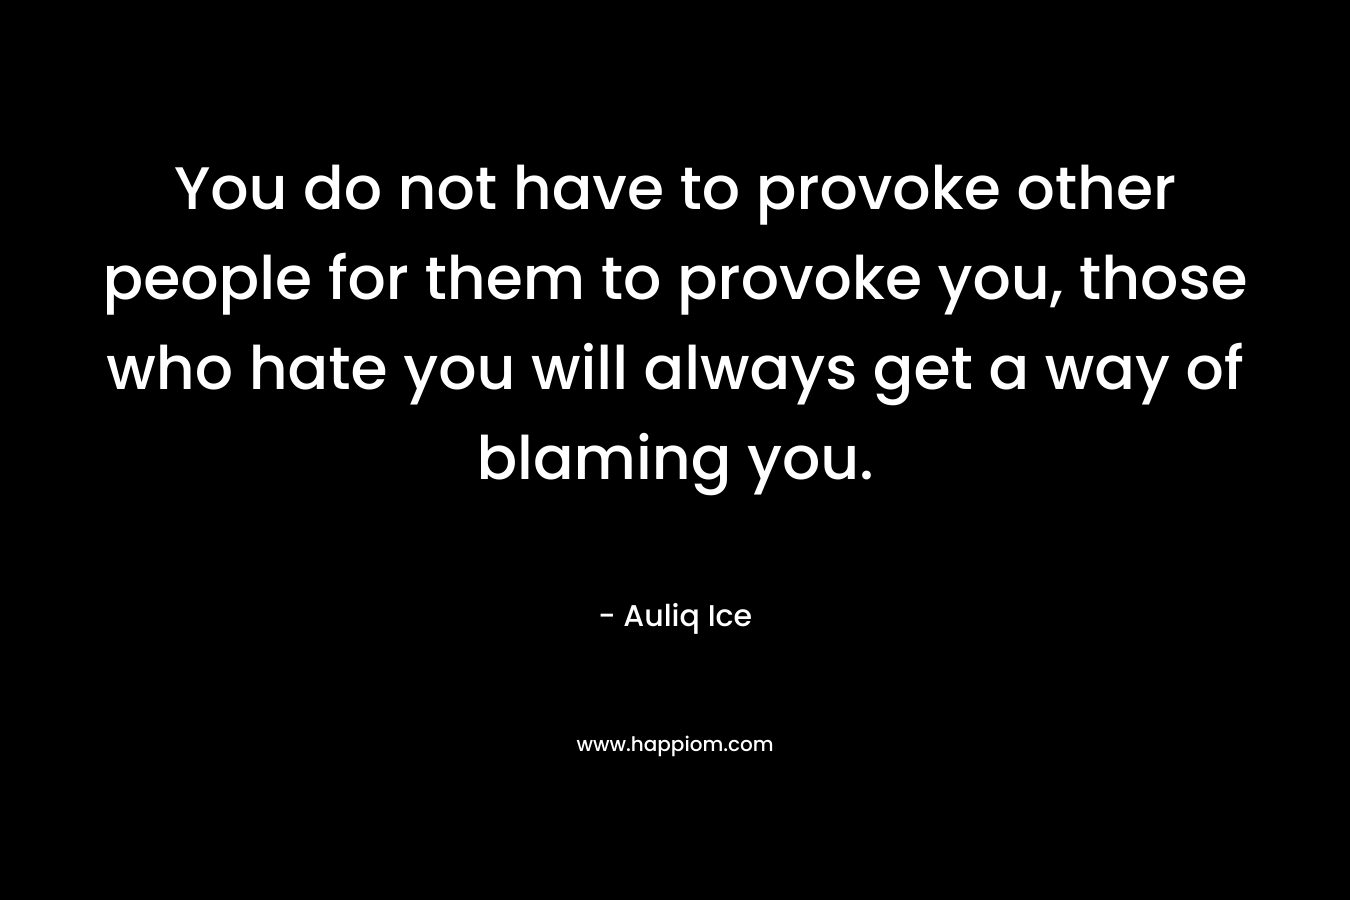 You do not have to provoke other people for them to provoke you, those who hate you will always get a way of blaming you.